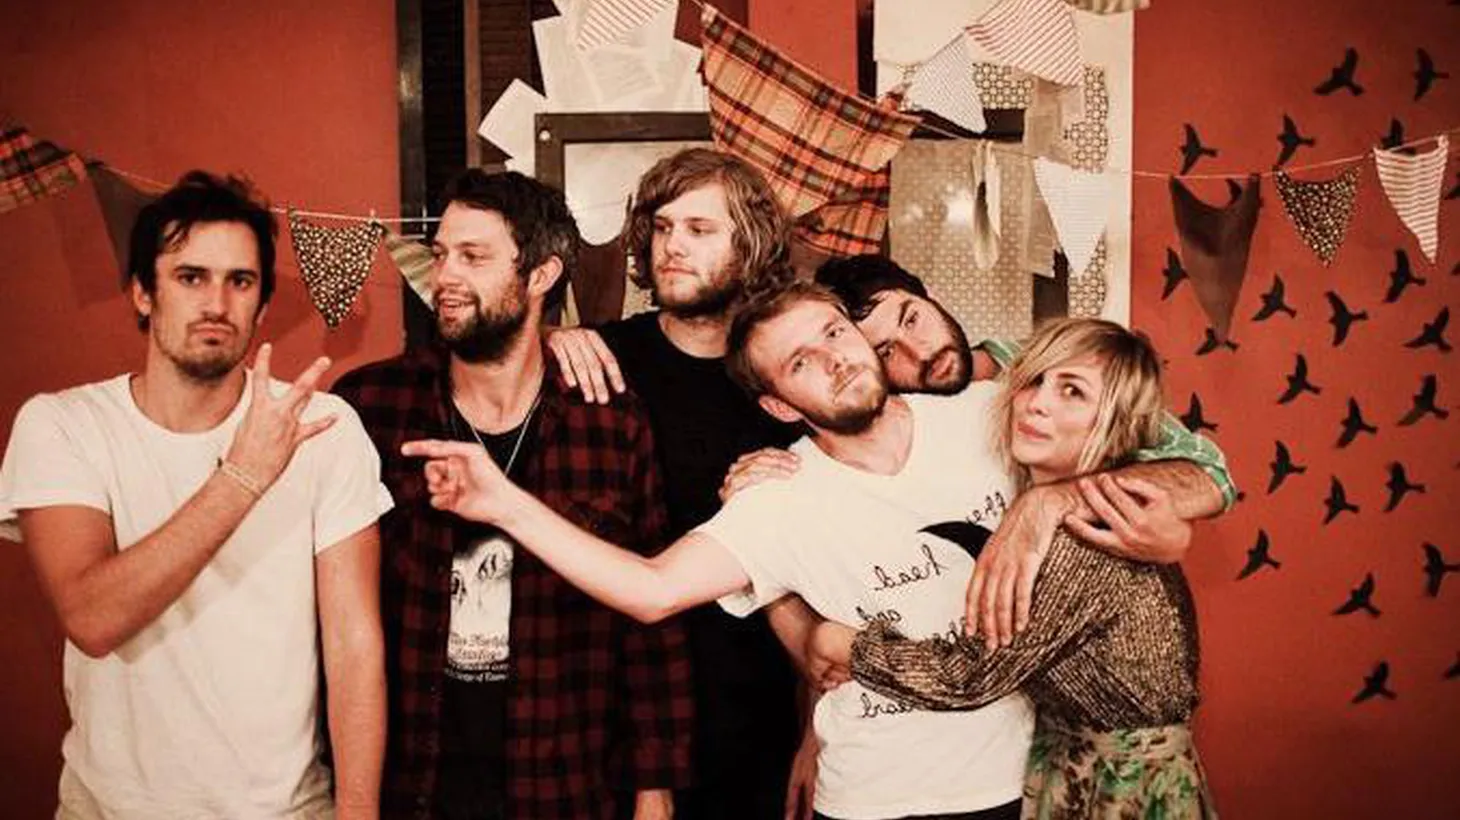 Seattle's The Head & The Heart have seen growing grassroots success since the release of their intriguing debut...